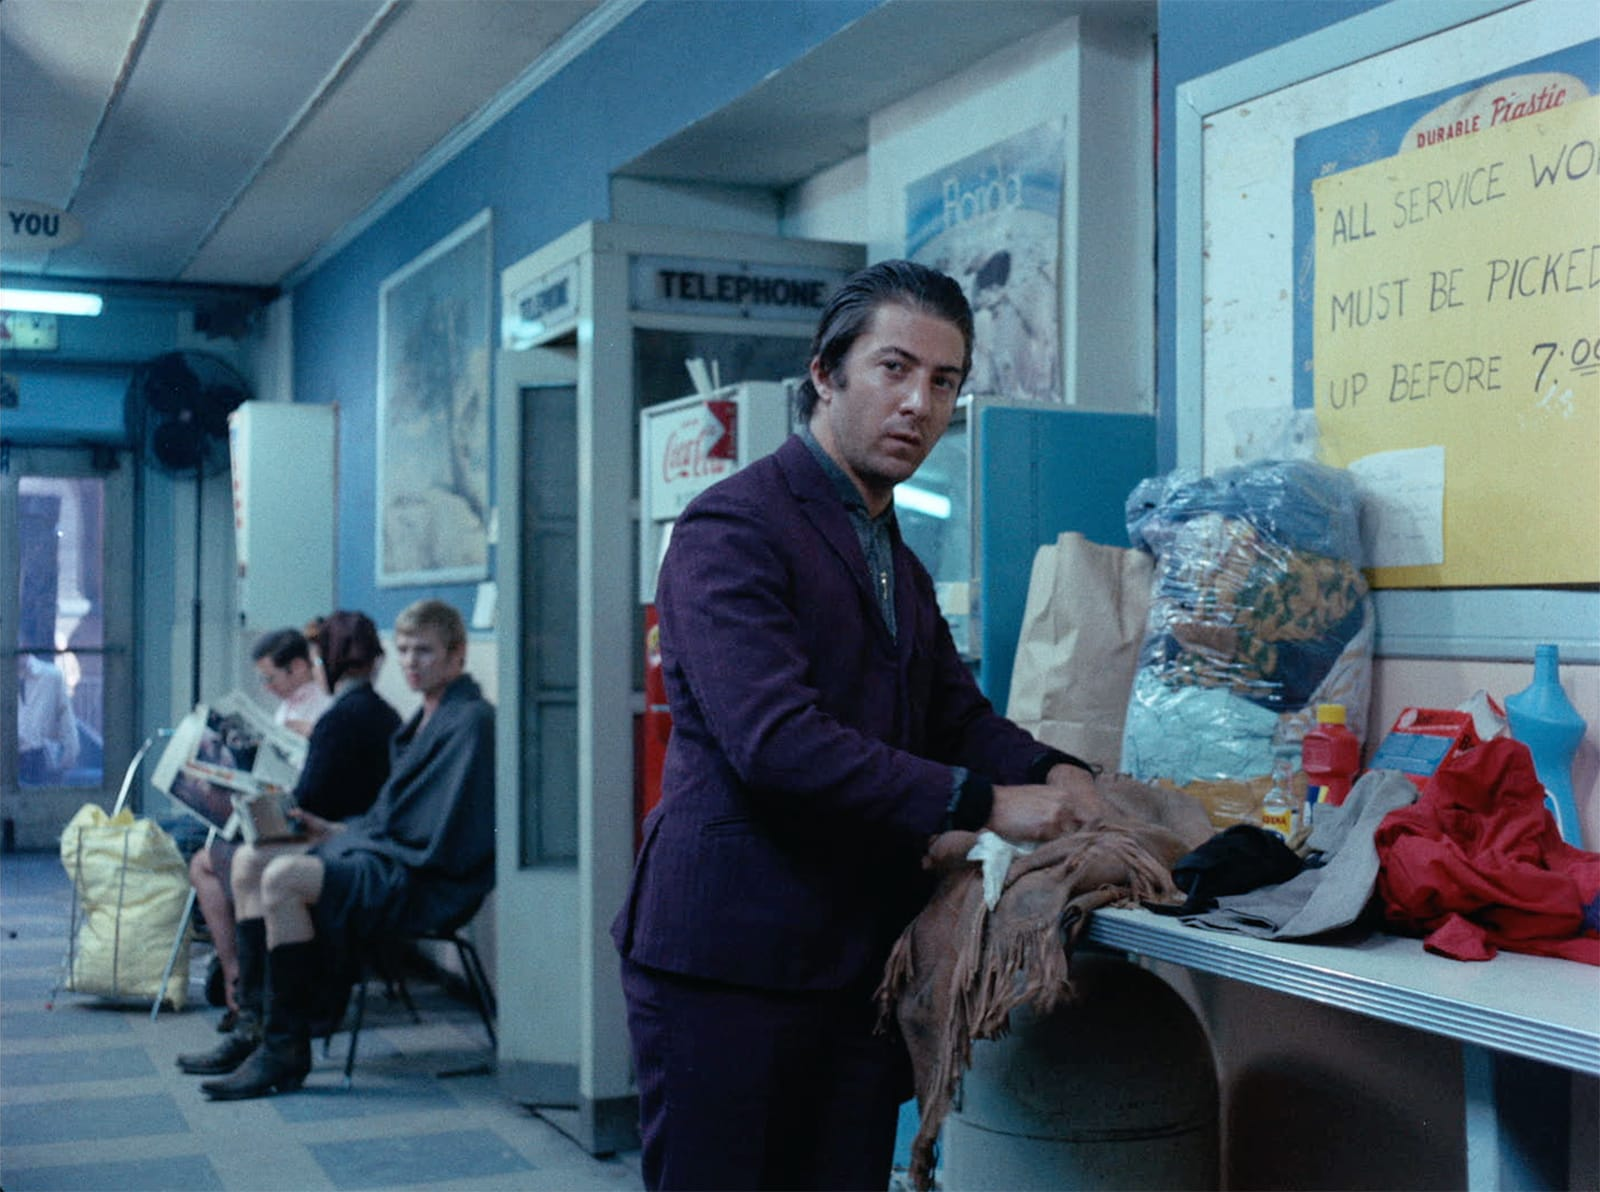 Rico is dressed in a rich purple suit. He leans over a counter in a laundromat, scrubbing at Joe's frilled cowboy jacket. He seems distracted, looking over his shoulder. Joe sits in a in the background, covered by a blanket. A few others sit beside him, holding their laundry.